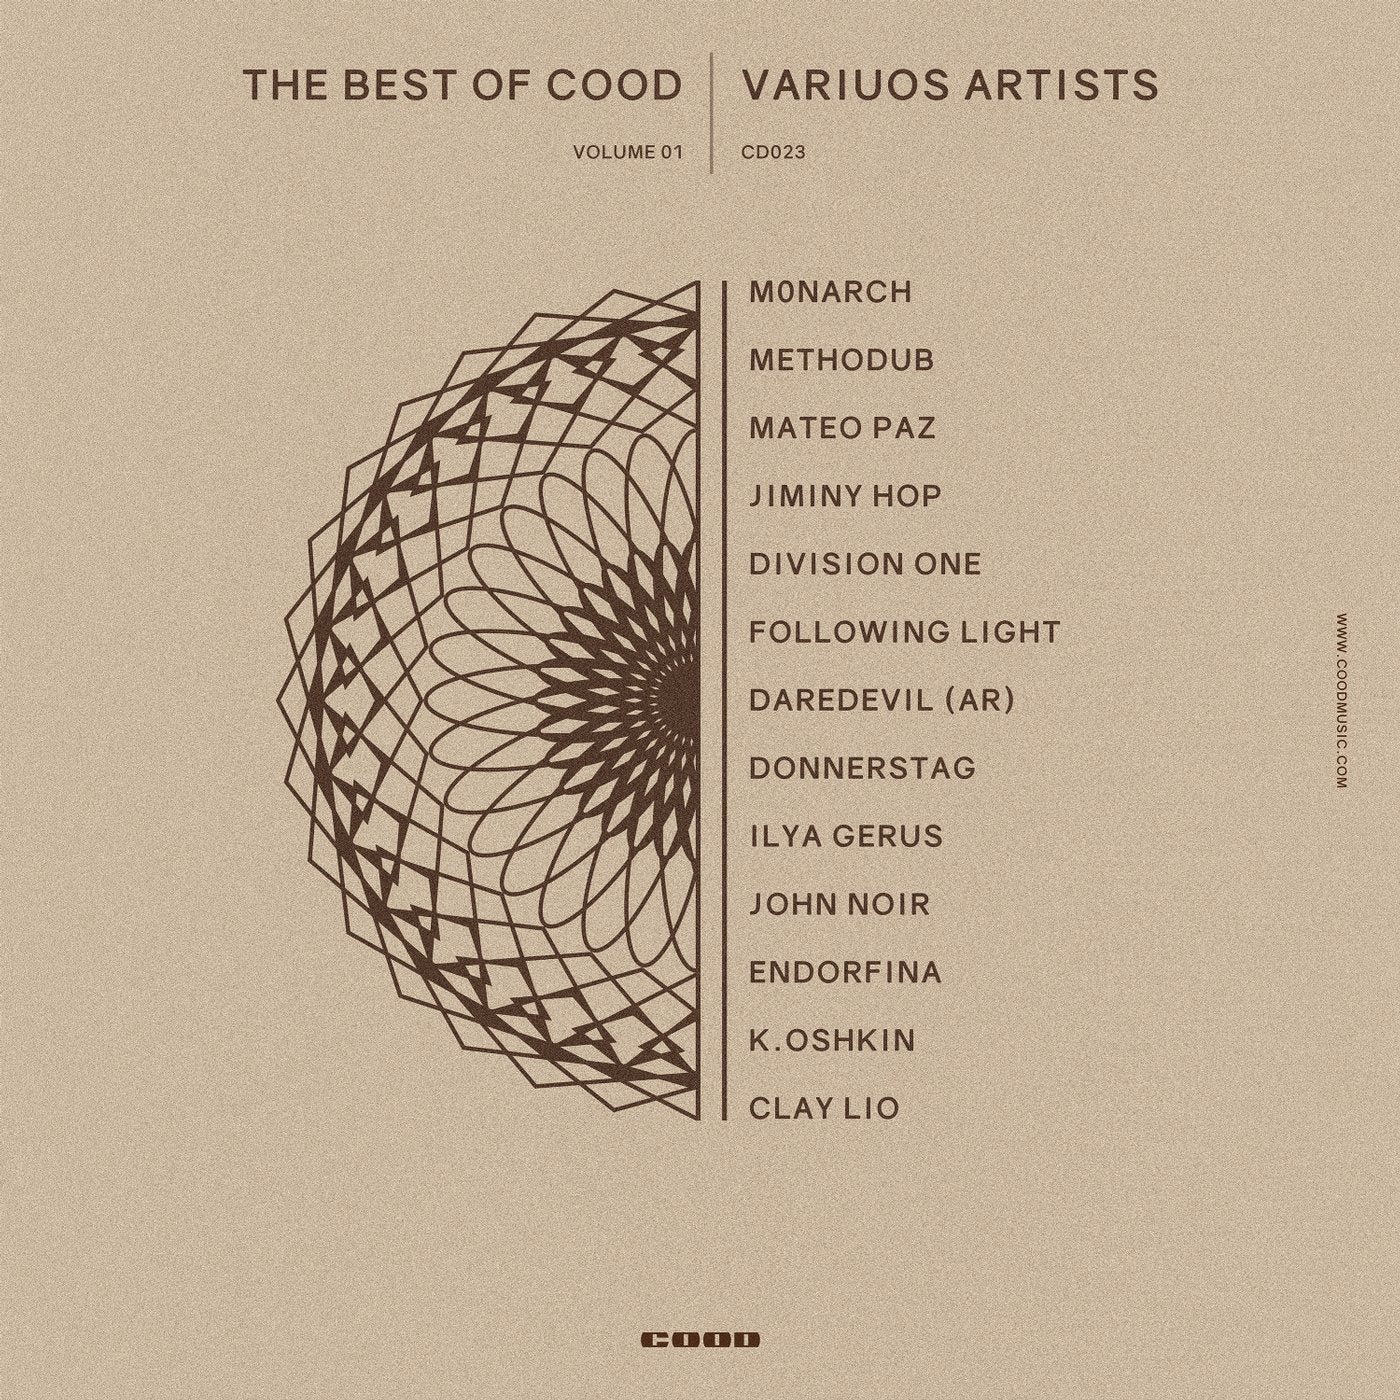 The Best of Cood, Vol. 01